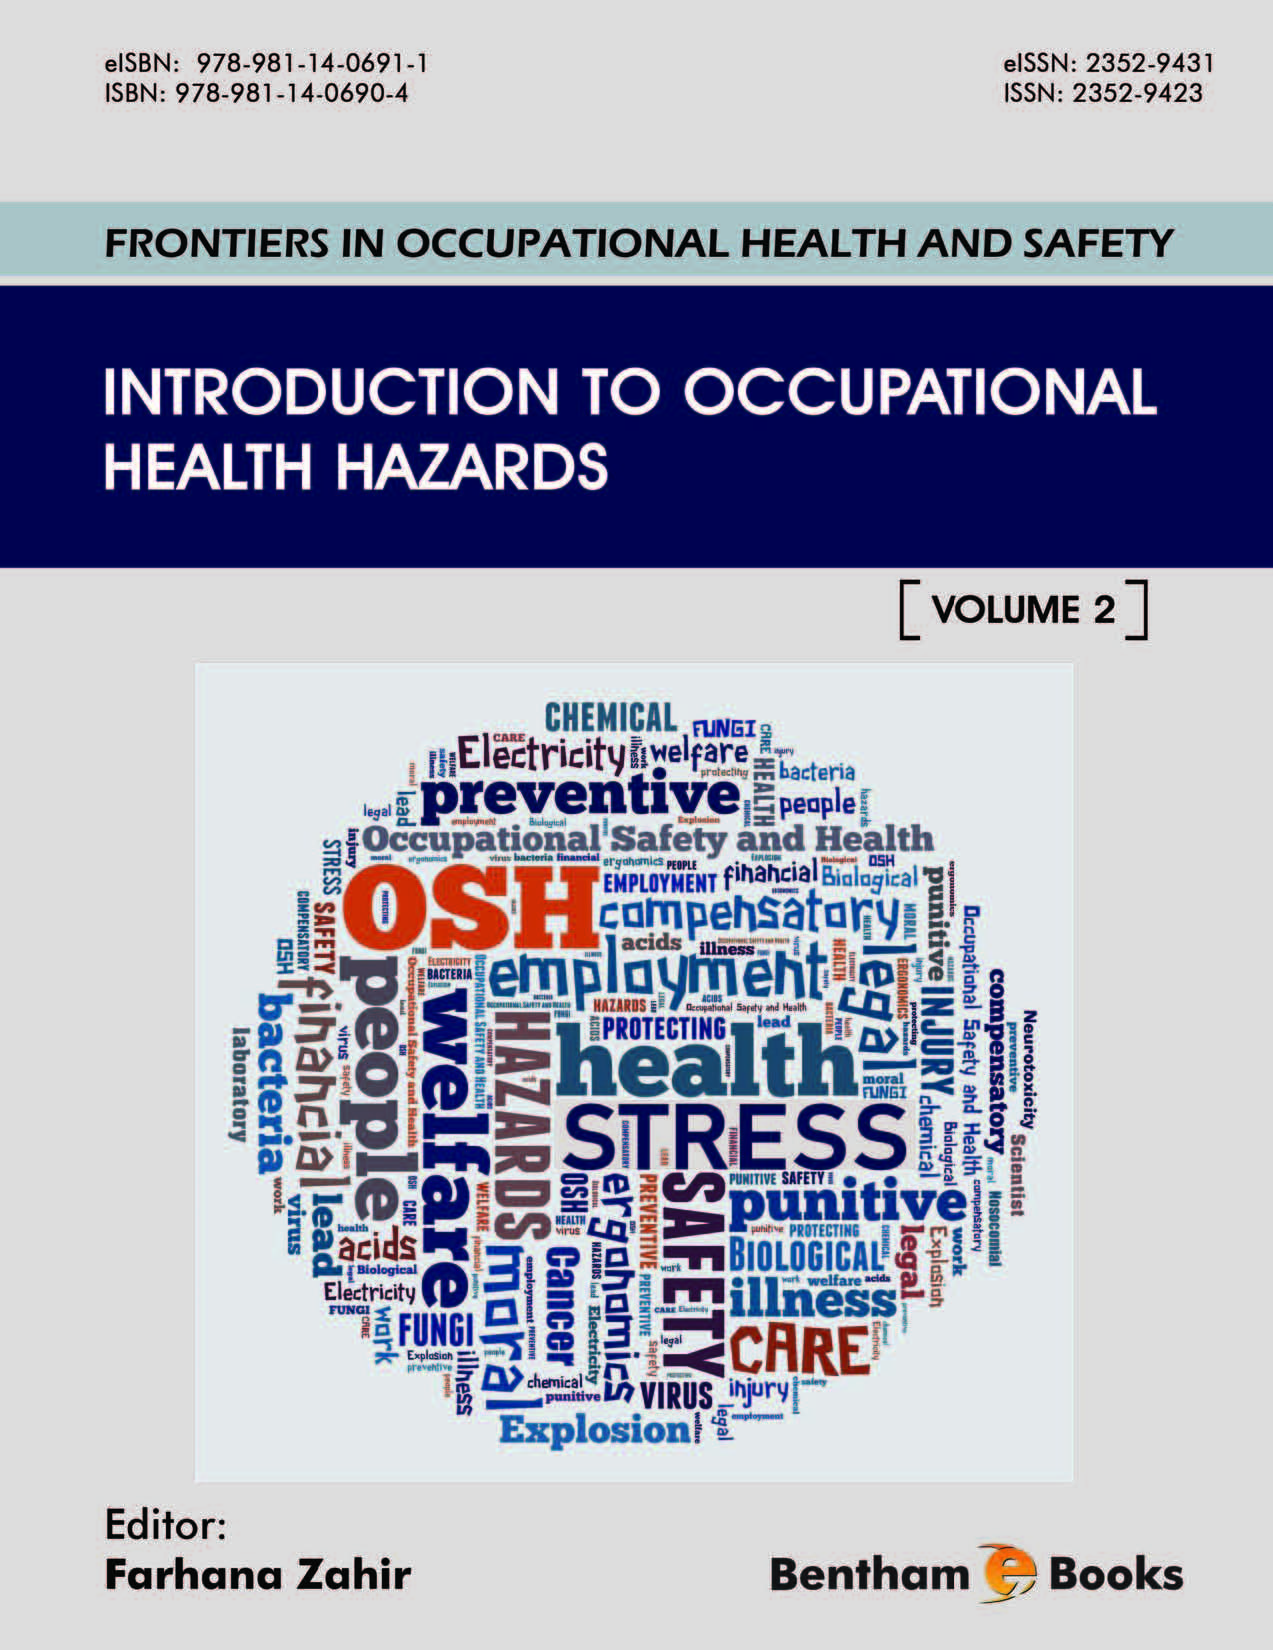 Introduction to Occupational Health Hazards